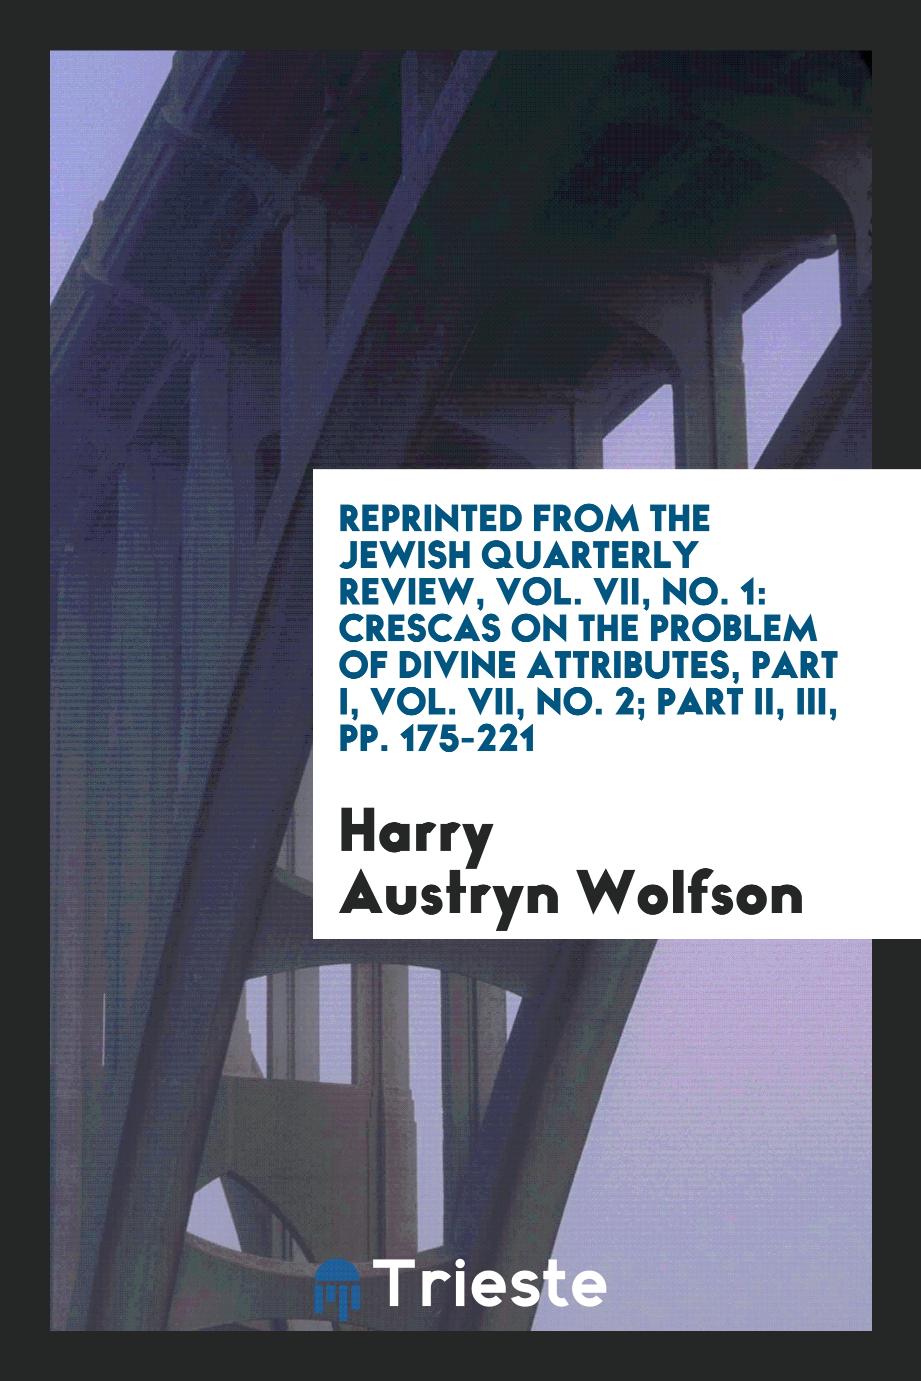 Reprinted from the Jewish Quarterly Review, Vol. VII, No. 1: Crescas on the Problem of Divine Attributes, Part I, Vol. VII, No. 2; Part II, III, pp. 175-221